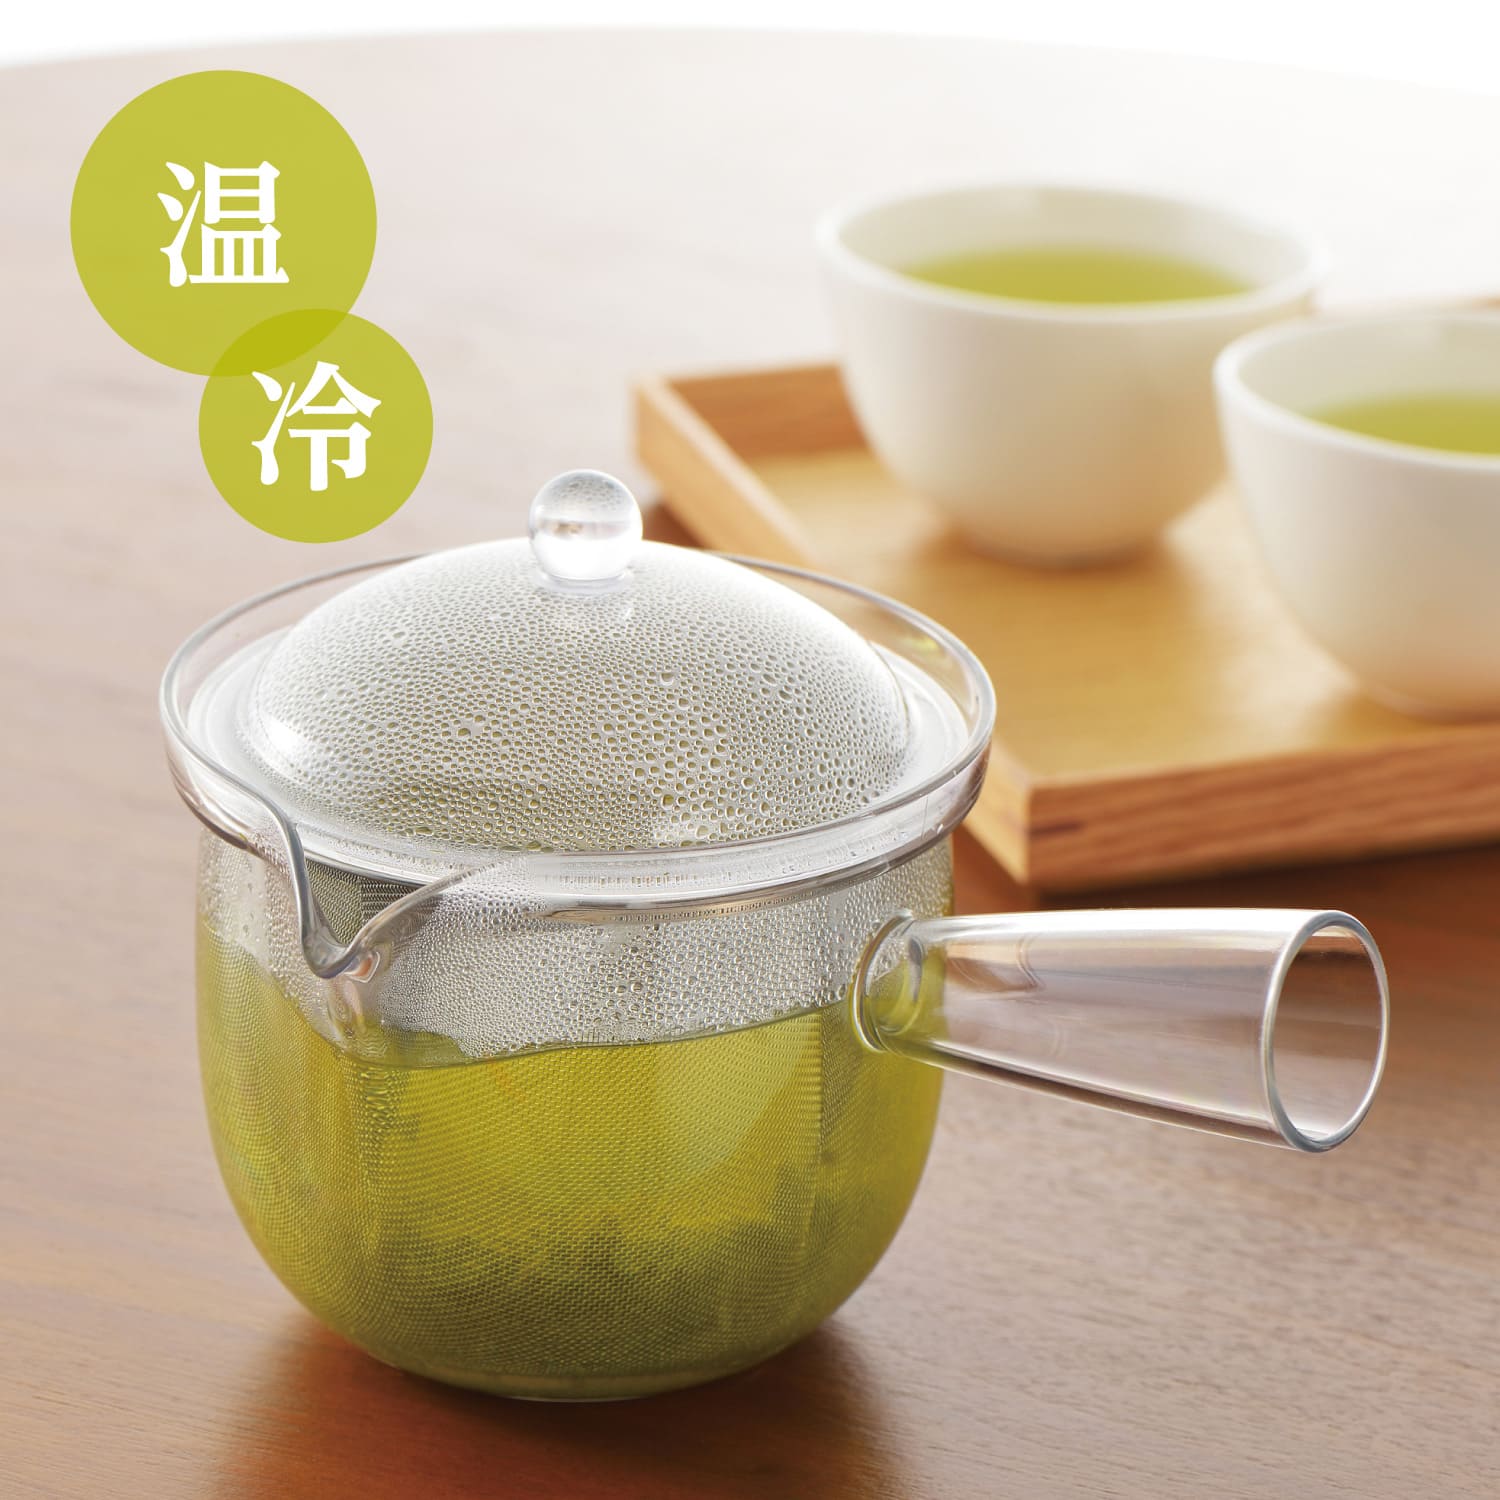 AKEBONO Clear Teapot with Stainless Steel Strainer - Polly Indonesia